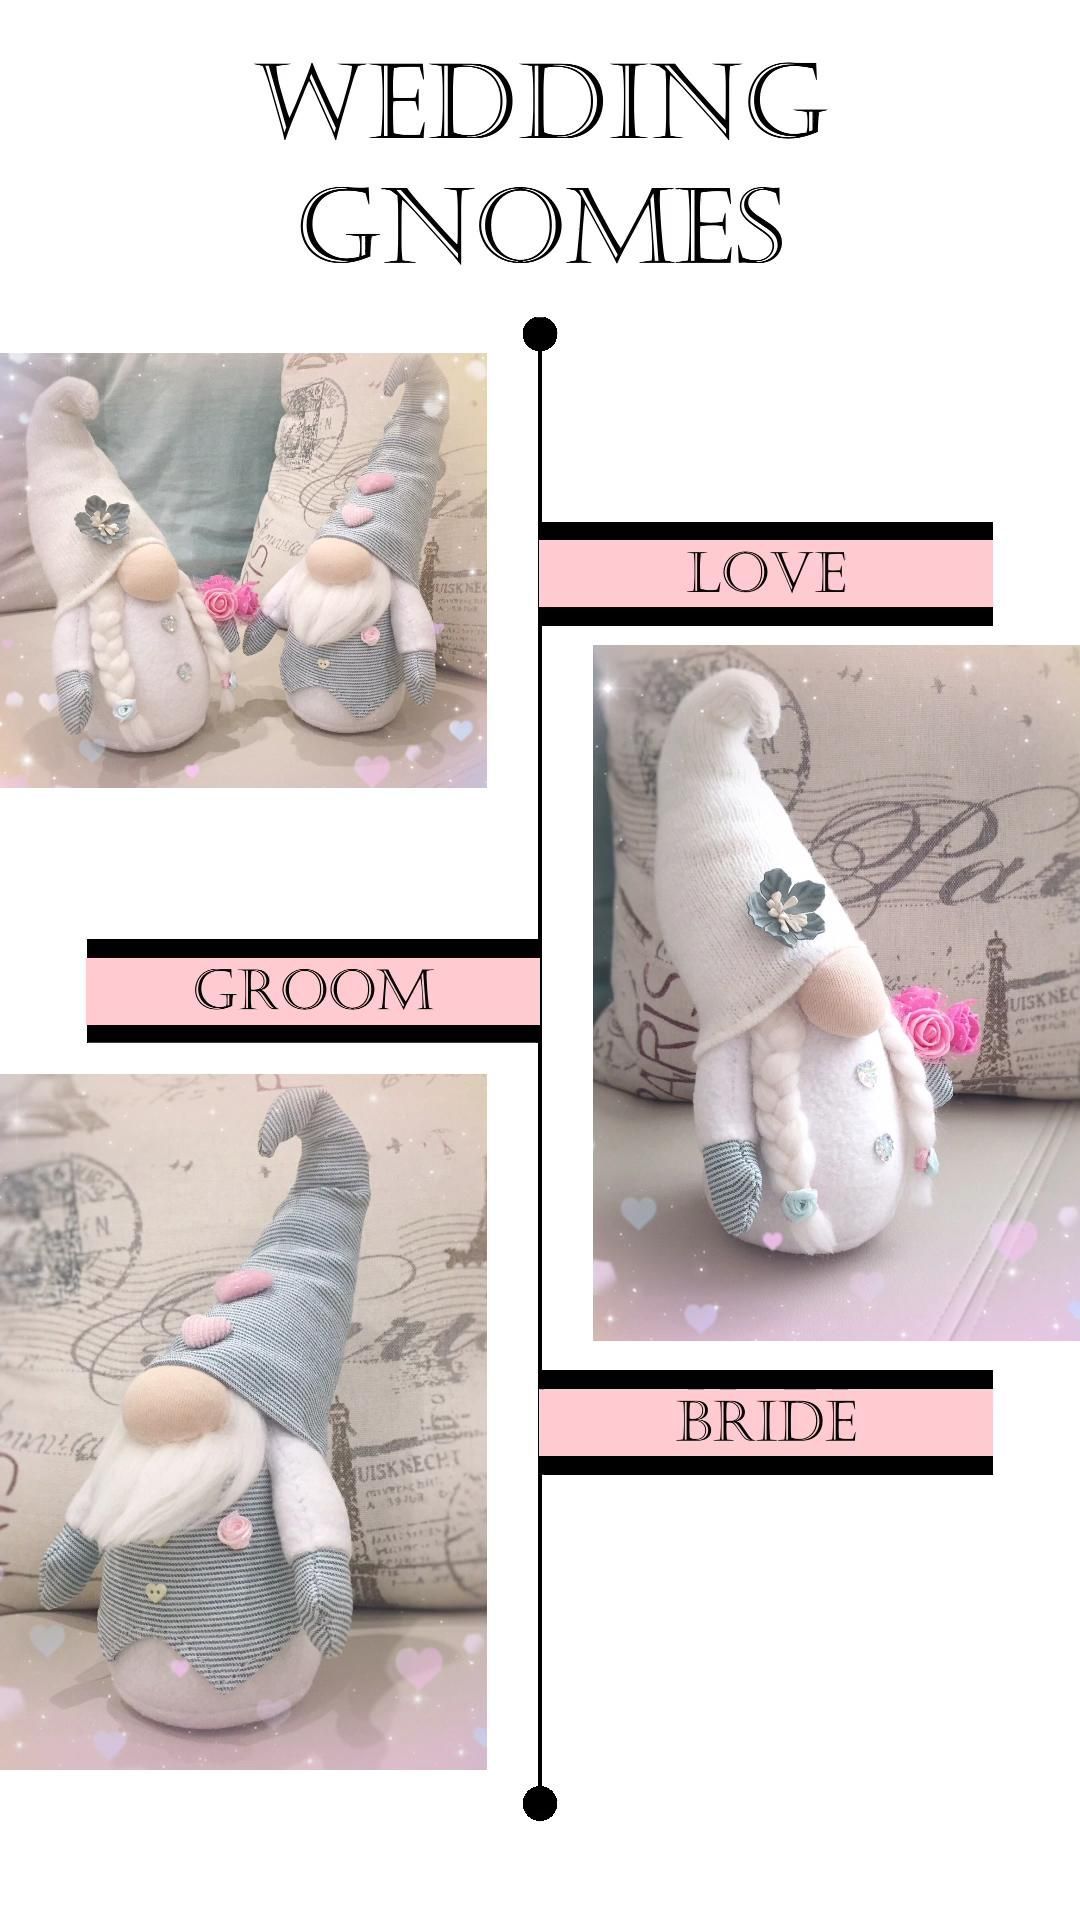 Wedding gnomes. Love gnomes. Bride and Groom gnome. Engagement gift idea. Wedding gift -   diy Gifts cheap